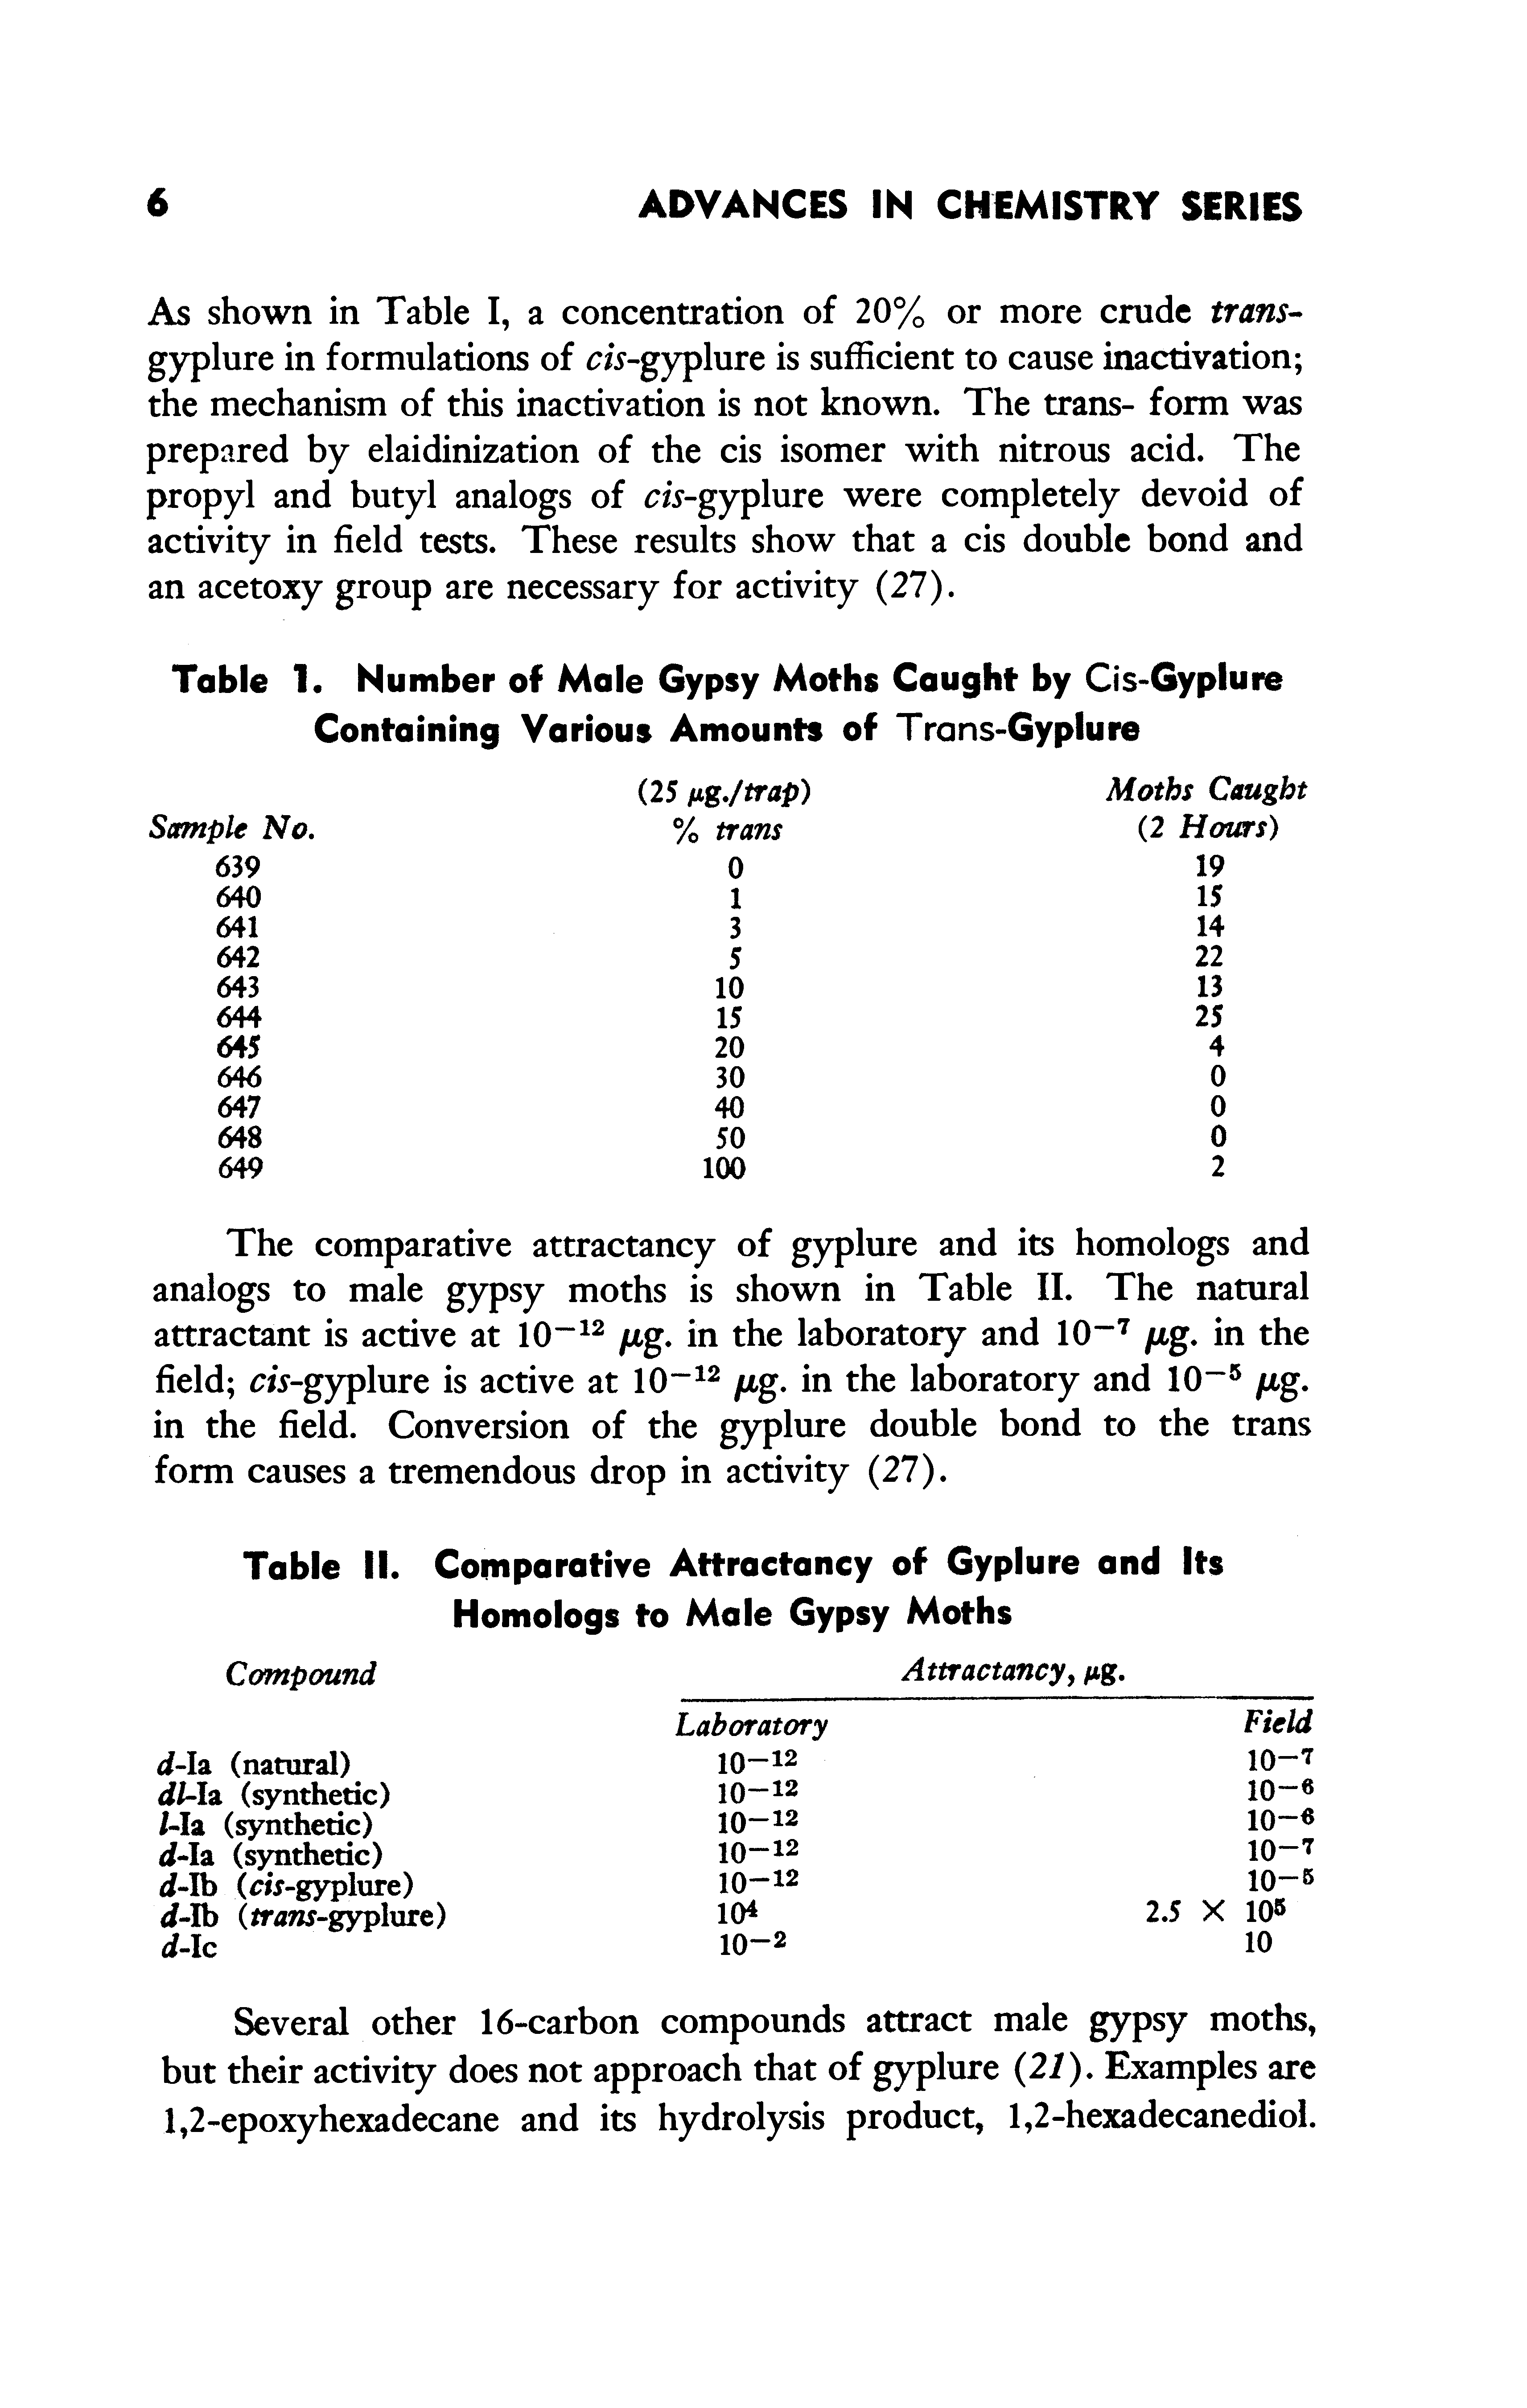 Table 1. Number of Male Gypsy Moths Caught by Cis-Gyplure Containing Various Amounts of Trans-Gyplure...